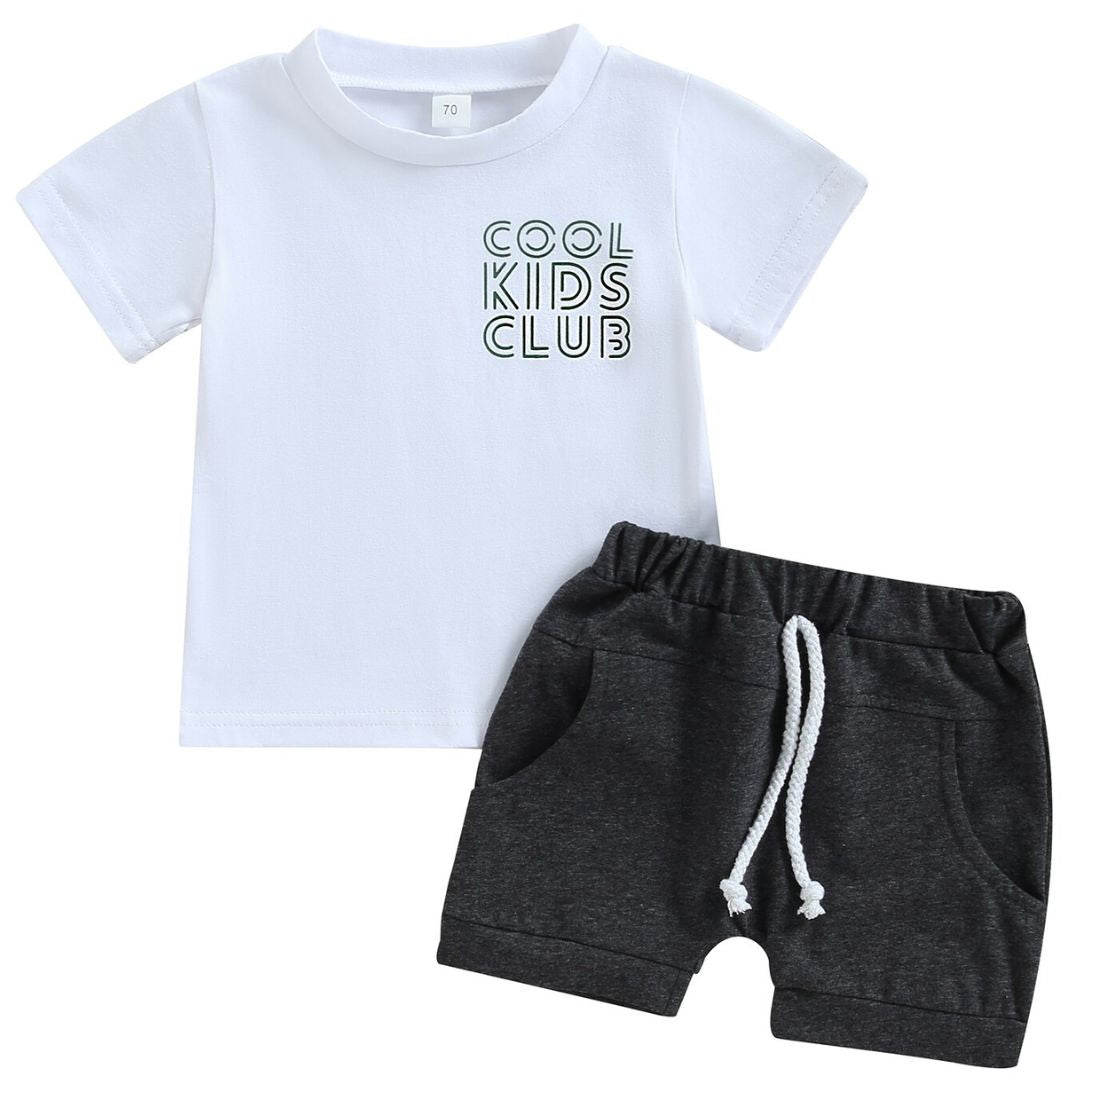 Baby & Toddler Boy Cool Kids Club Tee Set - My Trendy Youngsters | Buy Trendy and Afforable Baby and Toddler Clothing Sets @ My Trendy Youngsters - Dress your little man in Style @ My Trendy Youngsters 